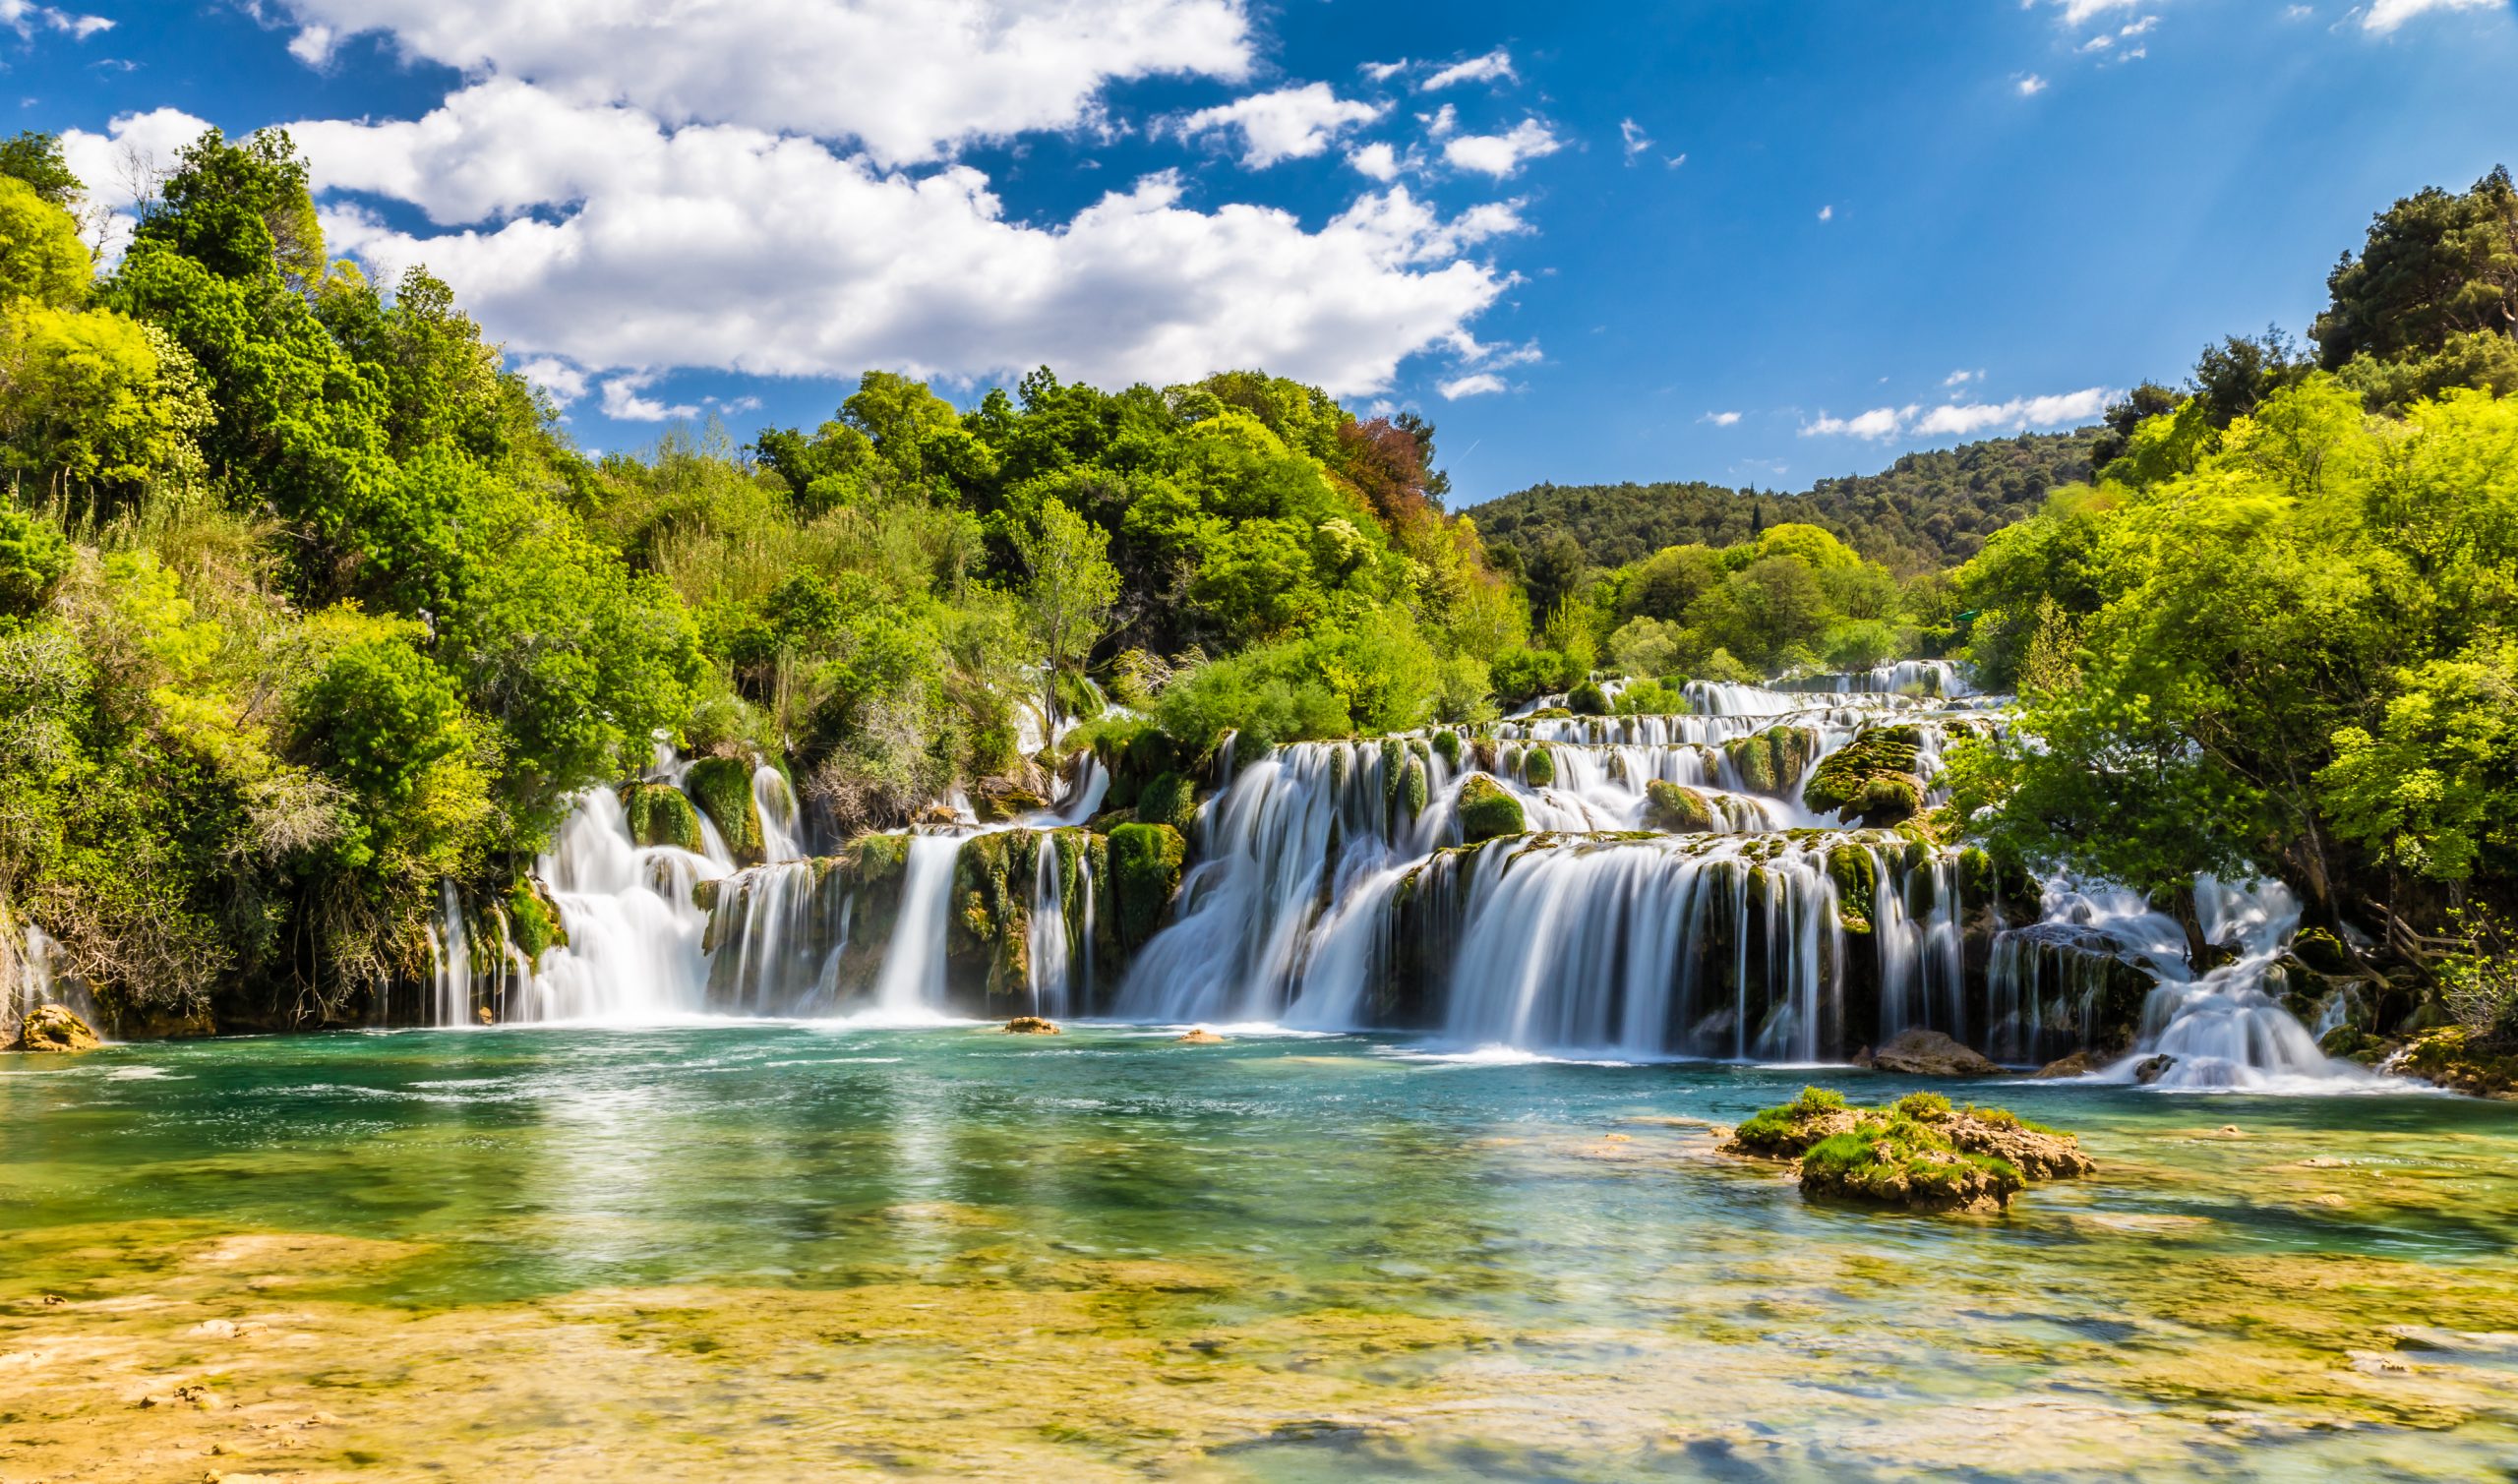 Experience The Stunning Nature Of Krka National Park During The Krka National Park And Sibenik Day Tour From Split